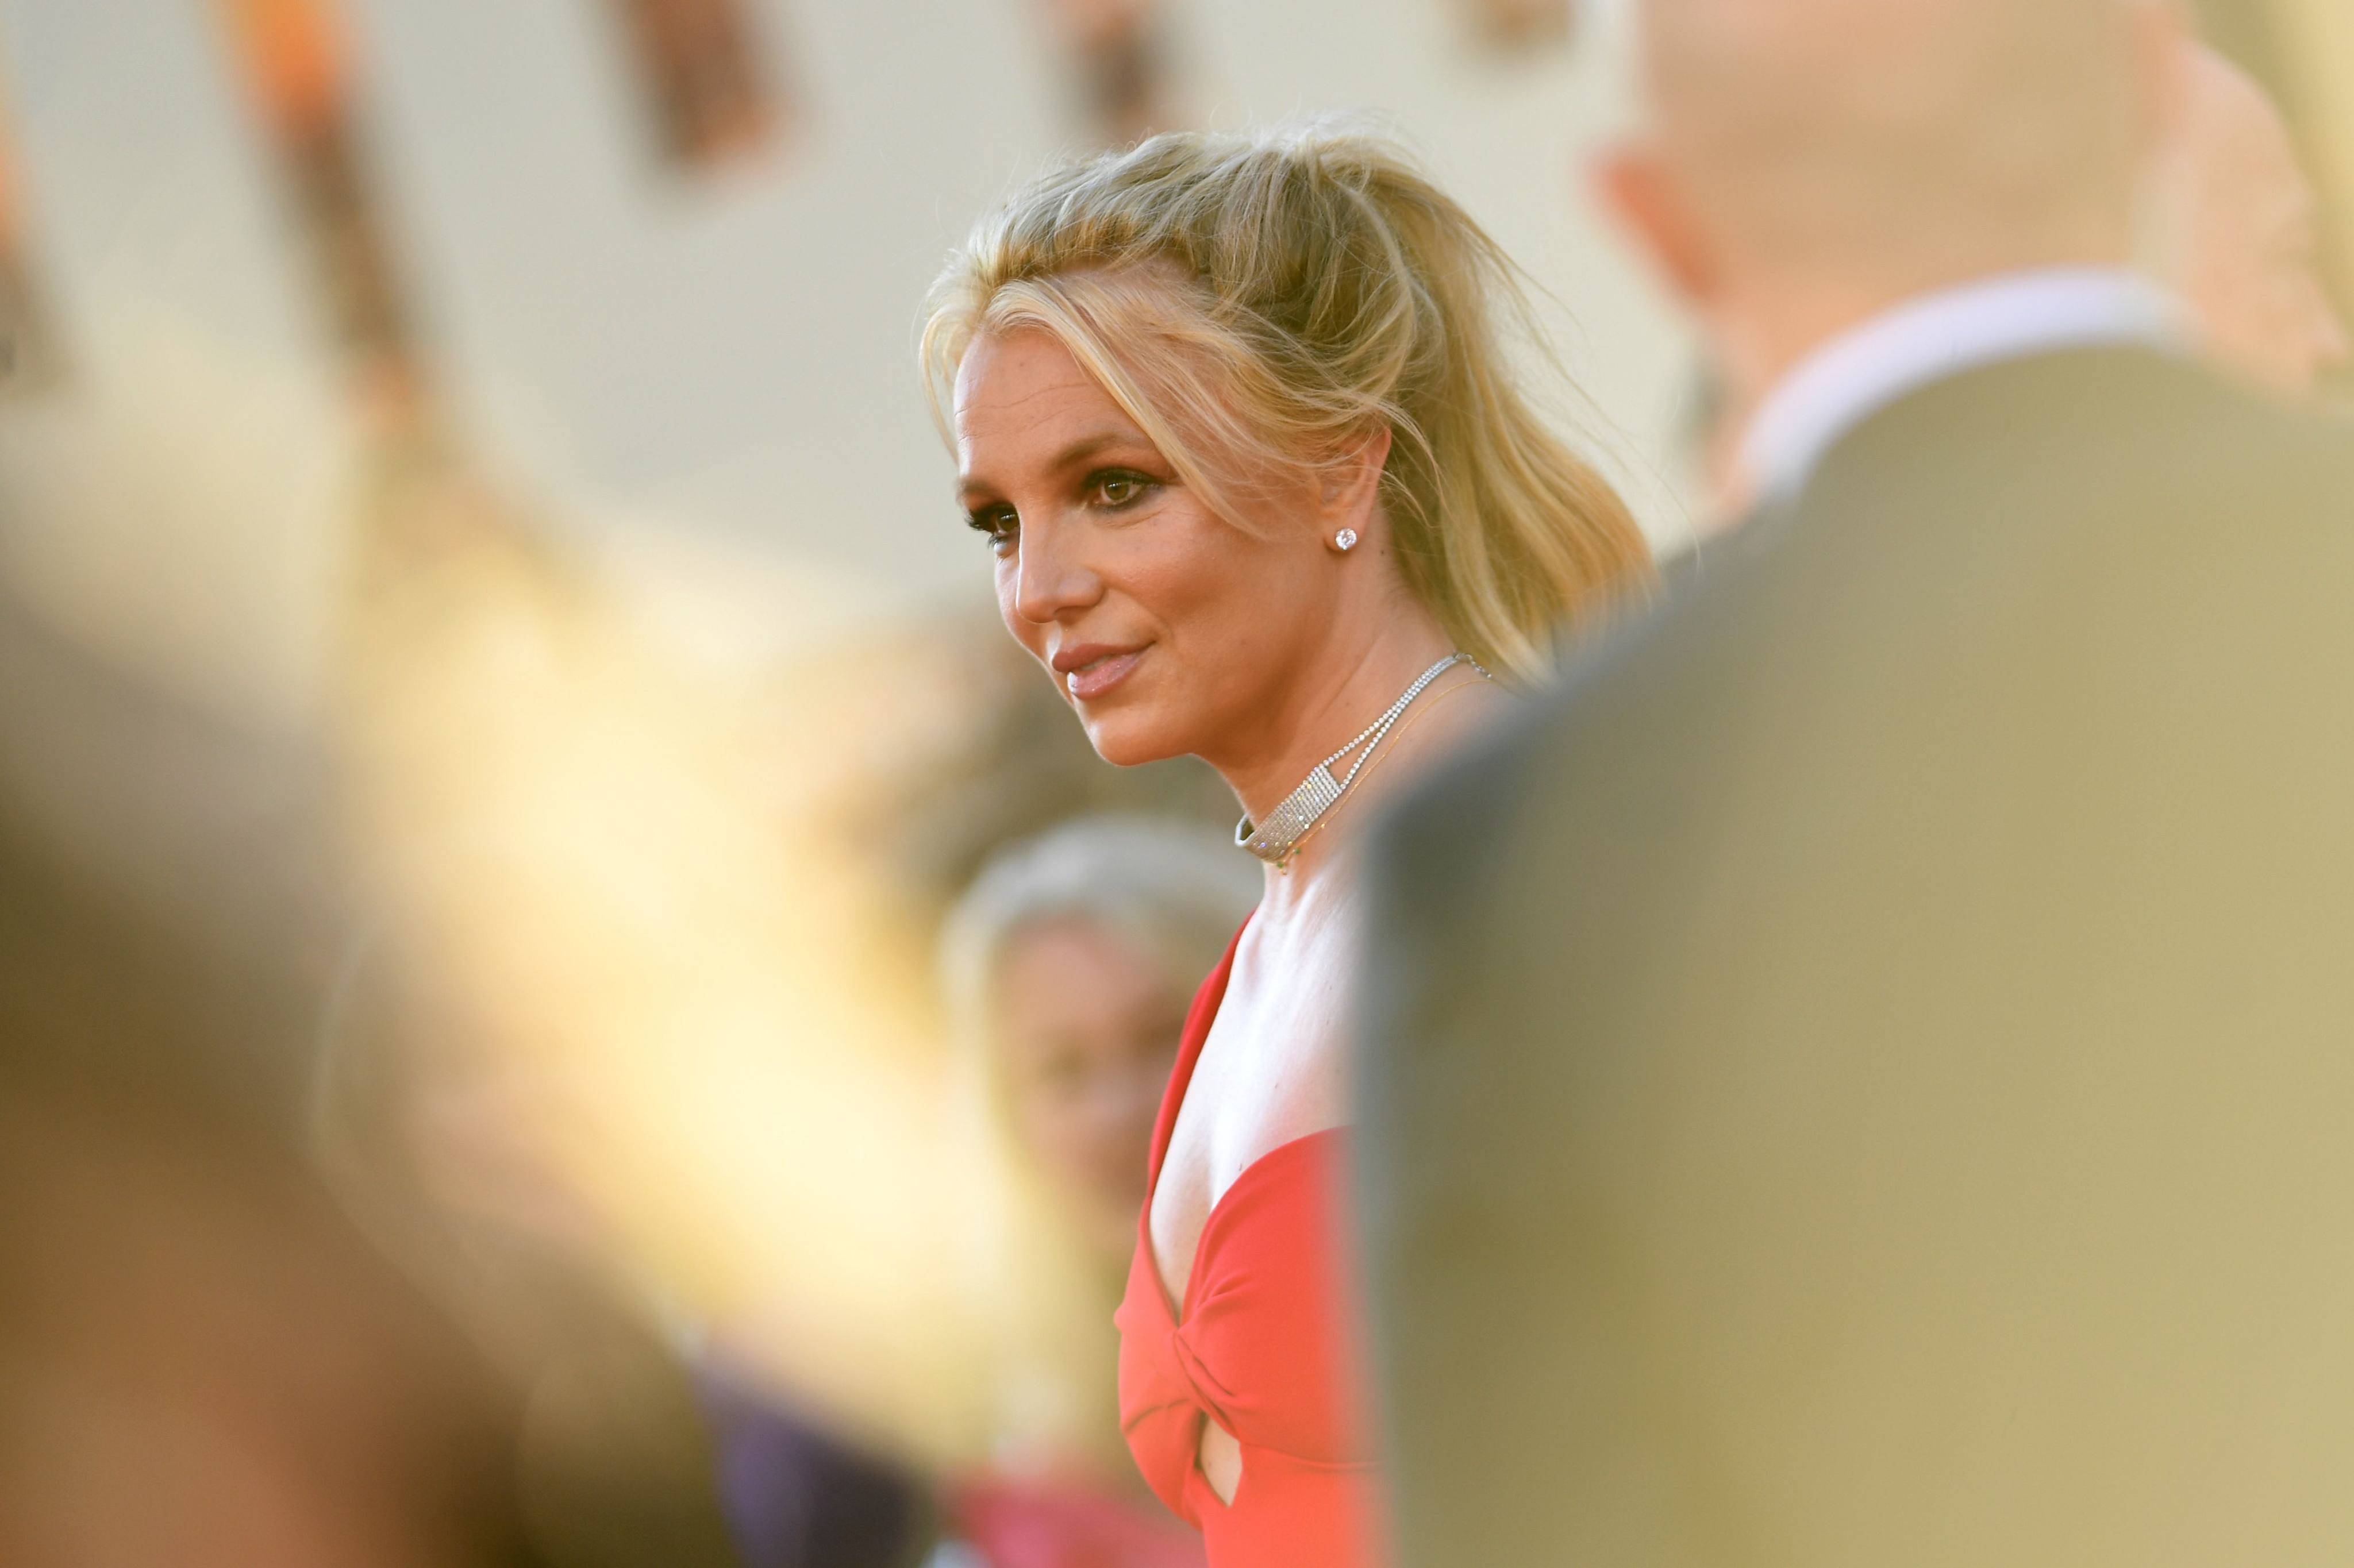 From wedding plans to new music, Britney Spears has many things on the horizon in 2022. Photo: Getty Images